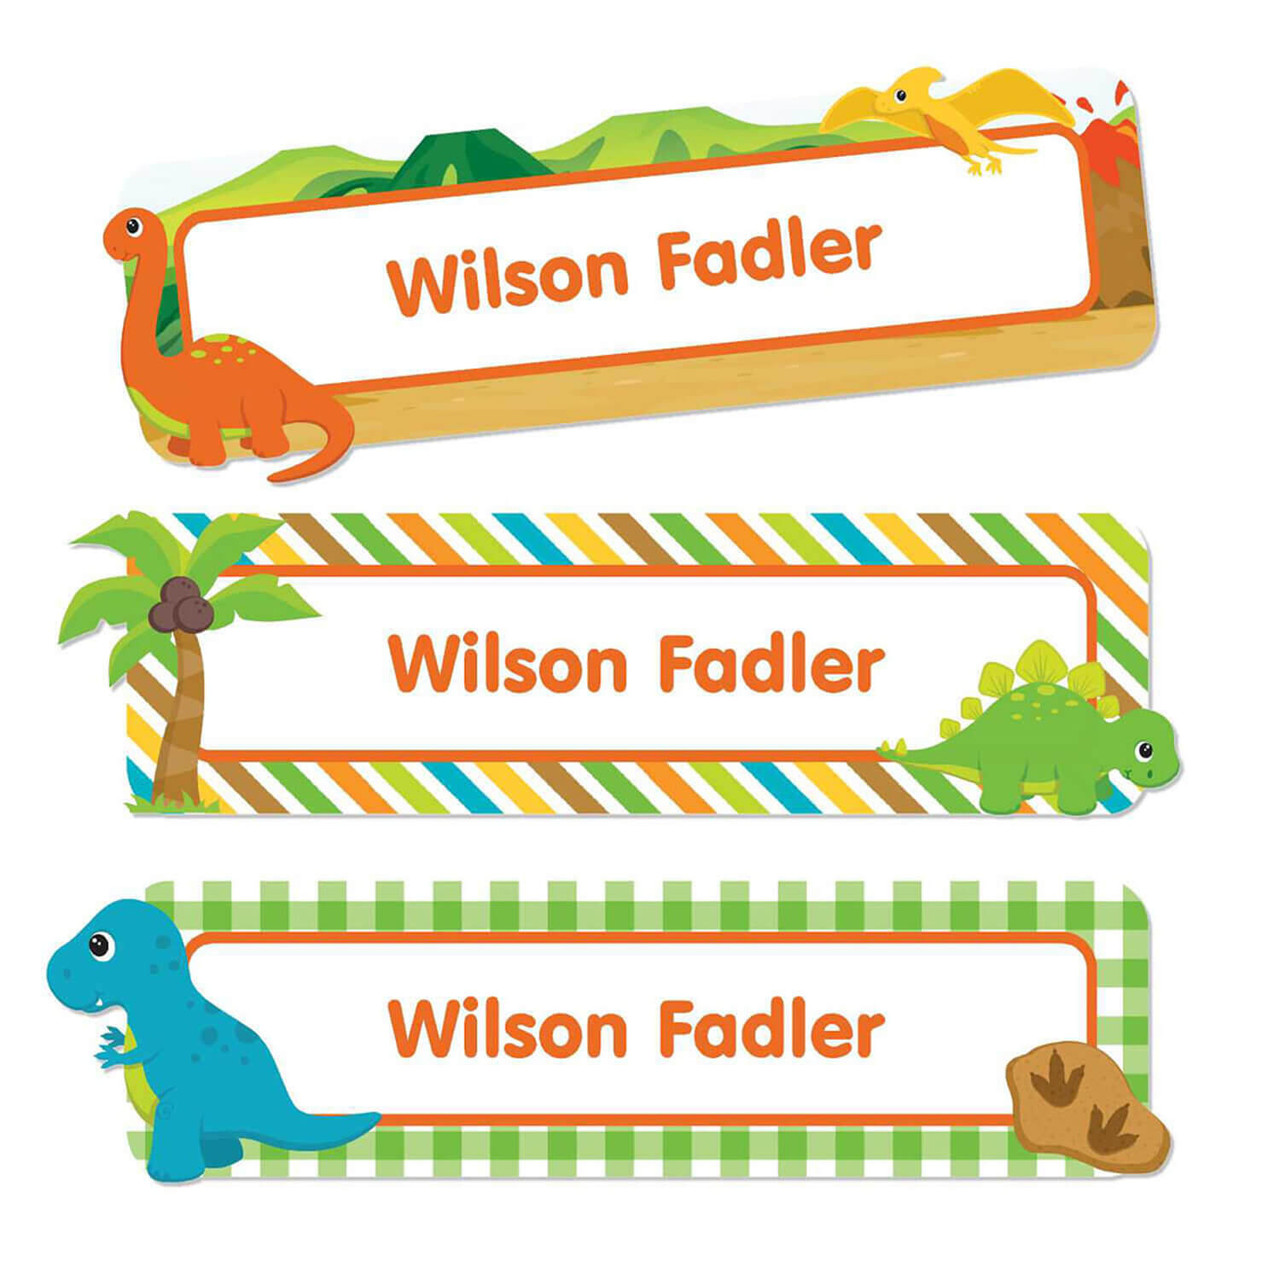 100 Printed Iron-on Name Labels / Tags for School, Care, Nursing or Camp